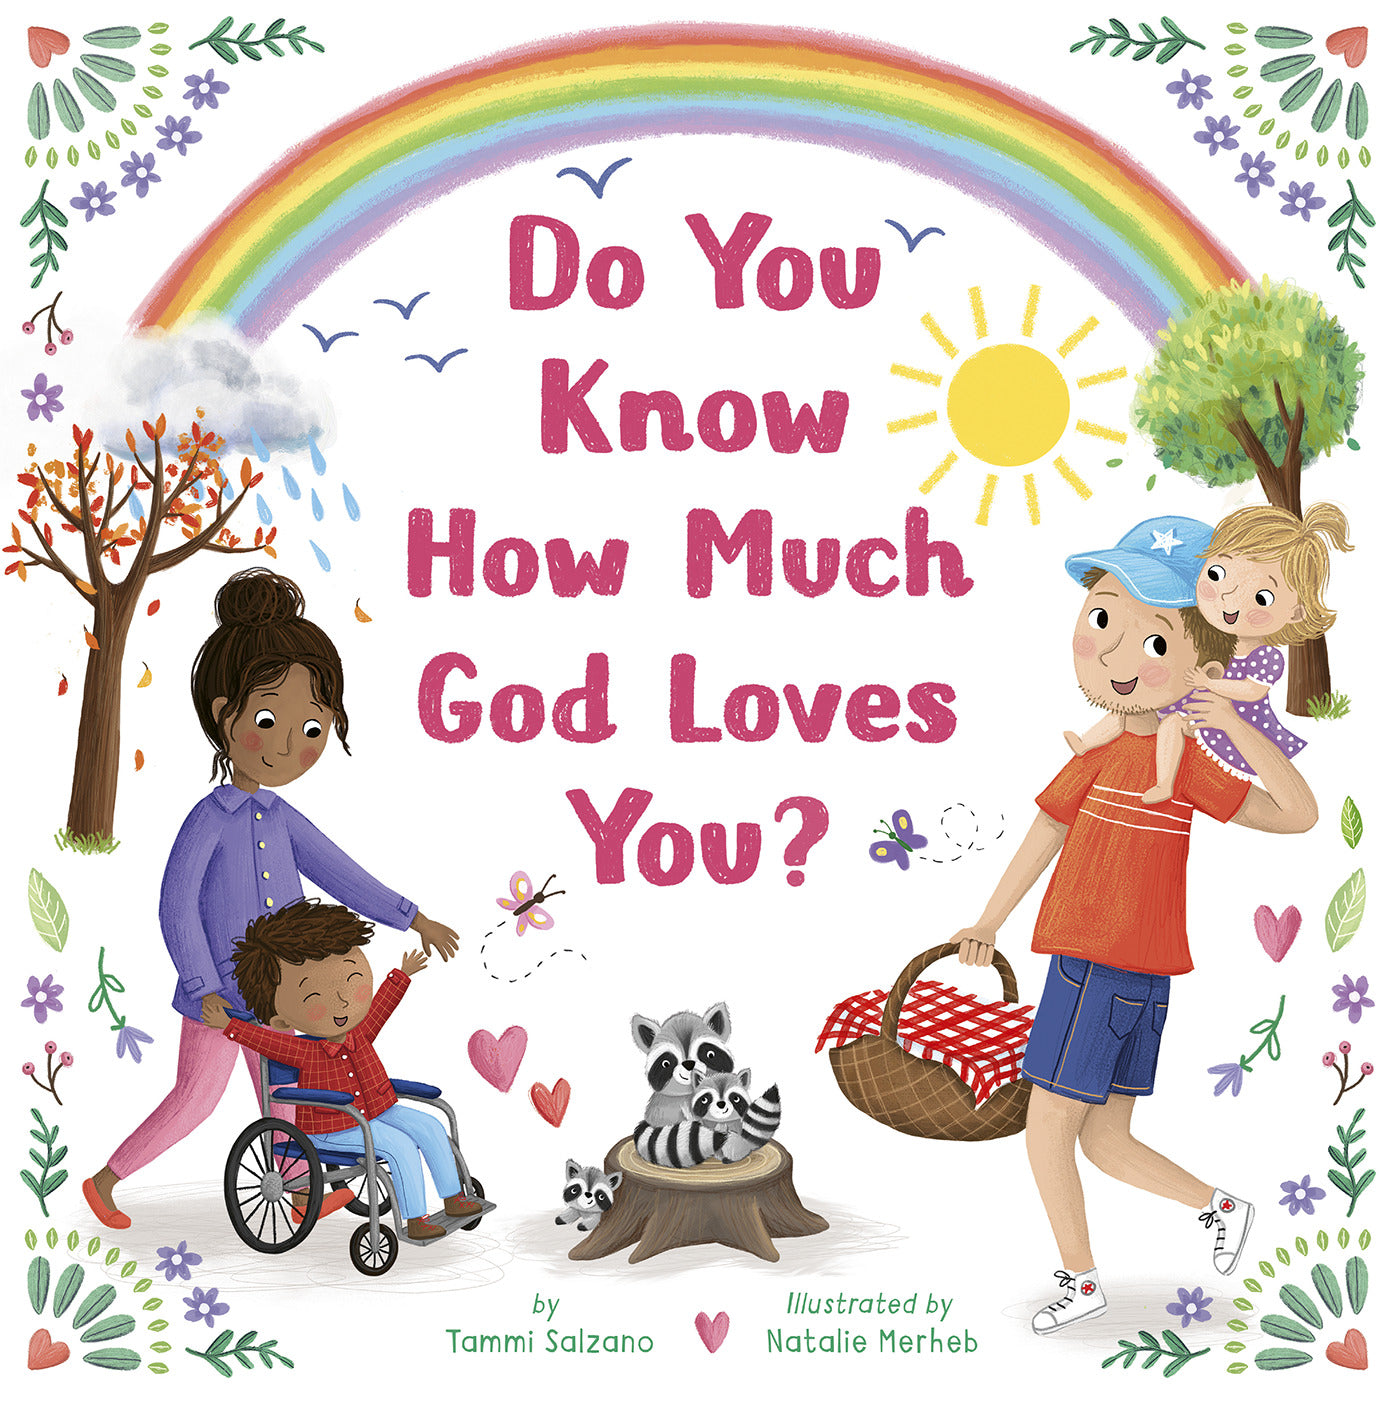 Do You Know How Much God Loves You?